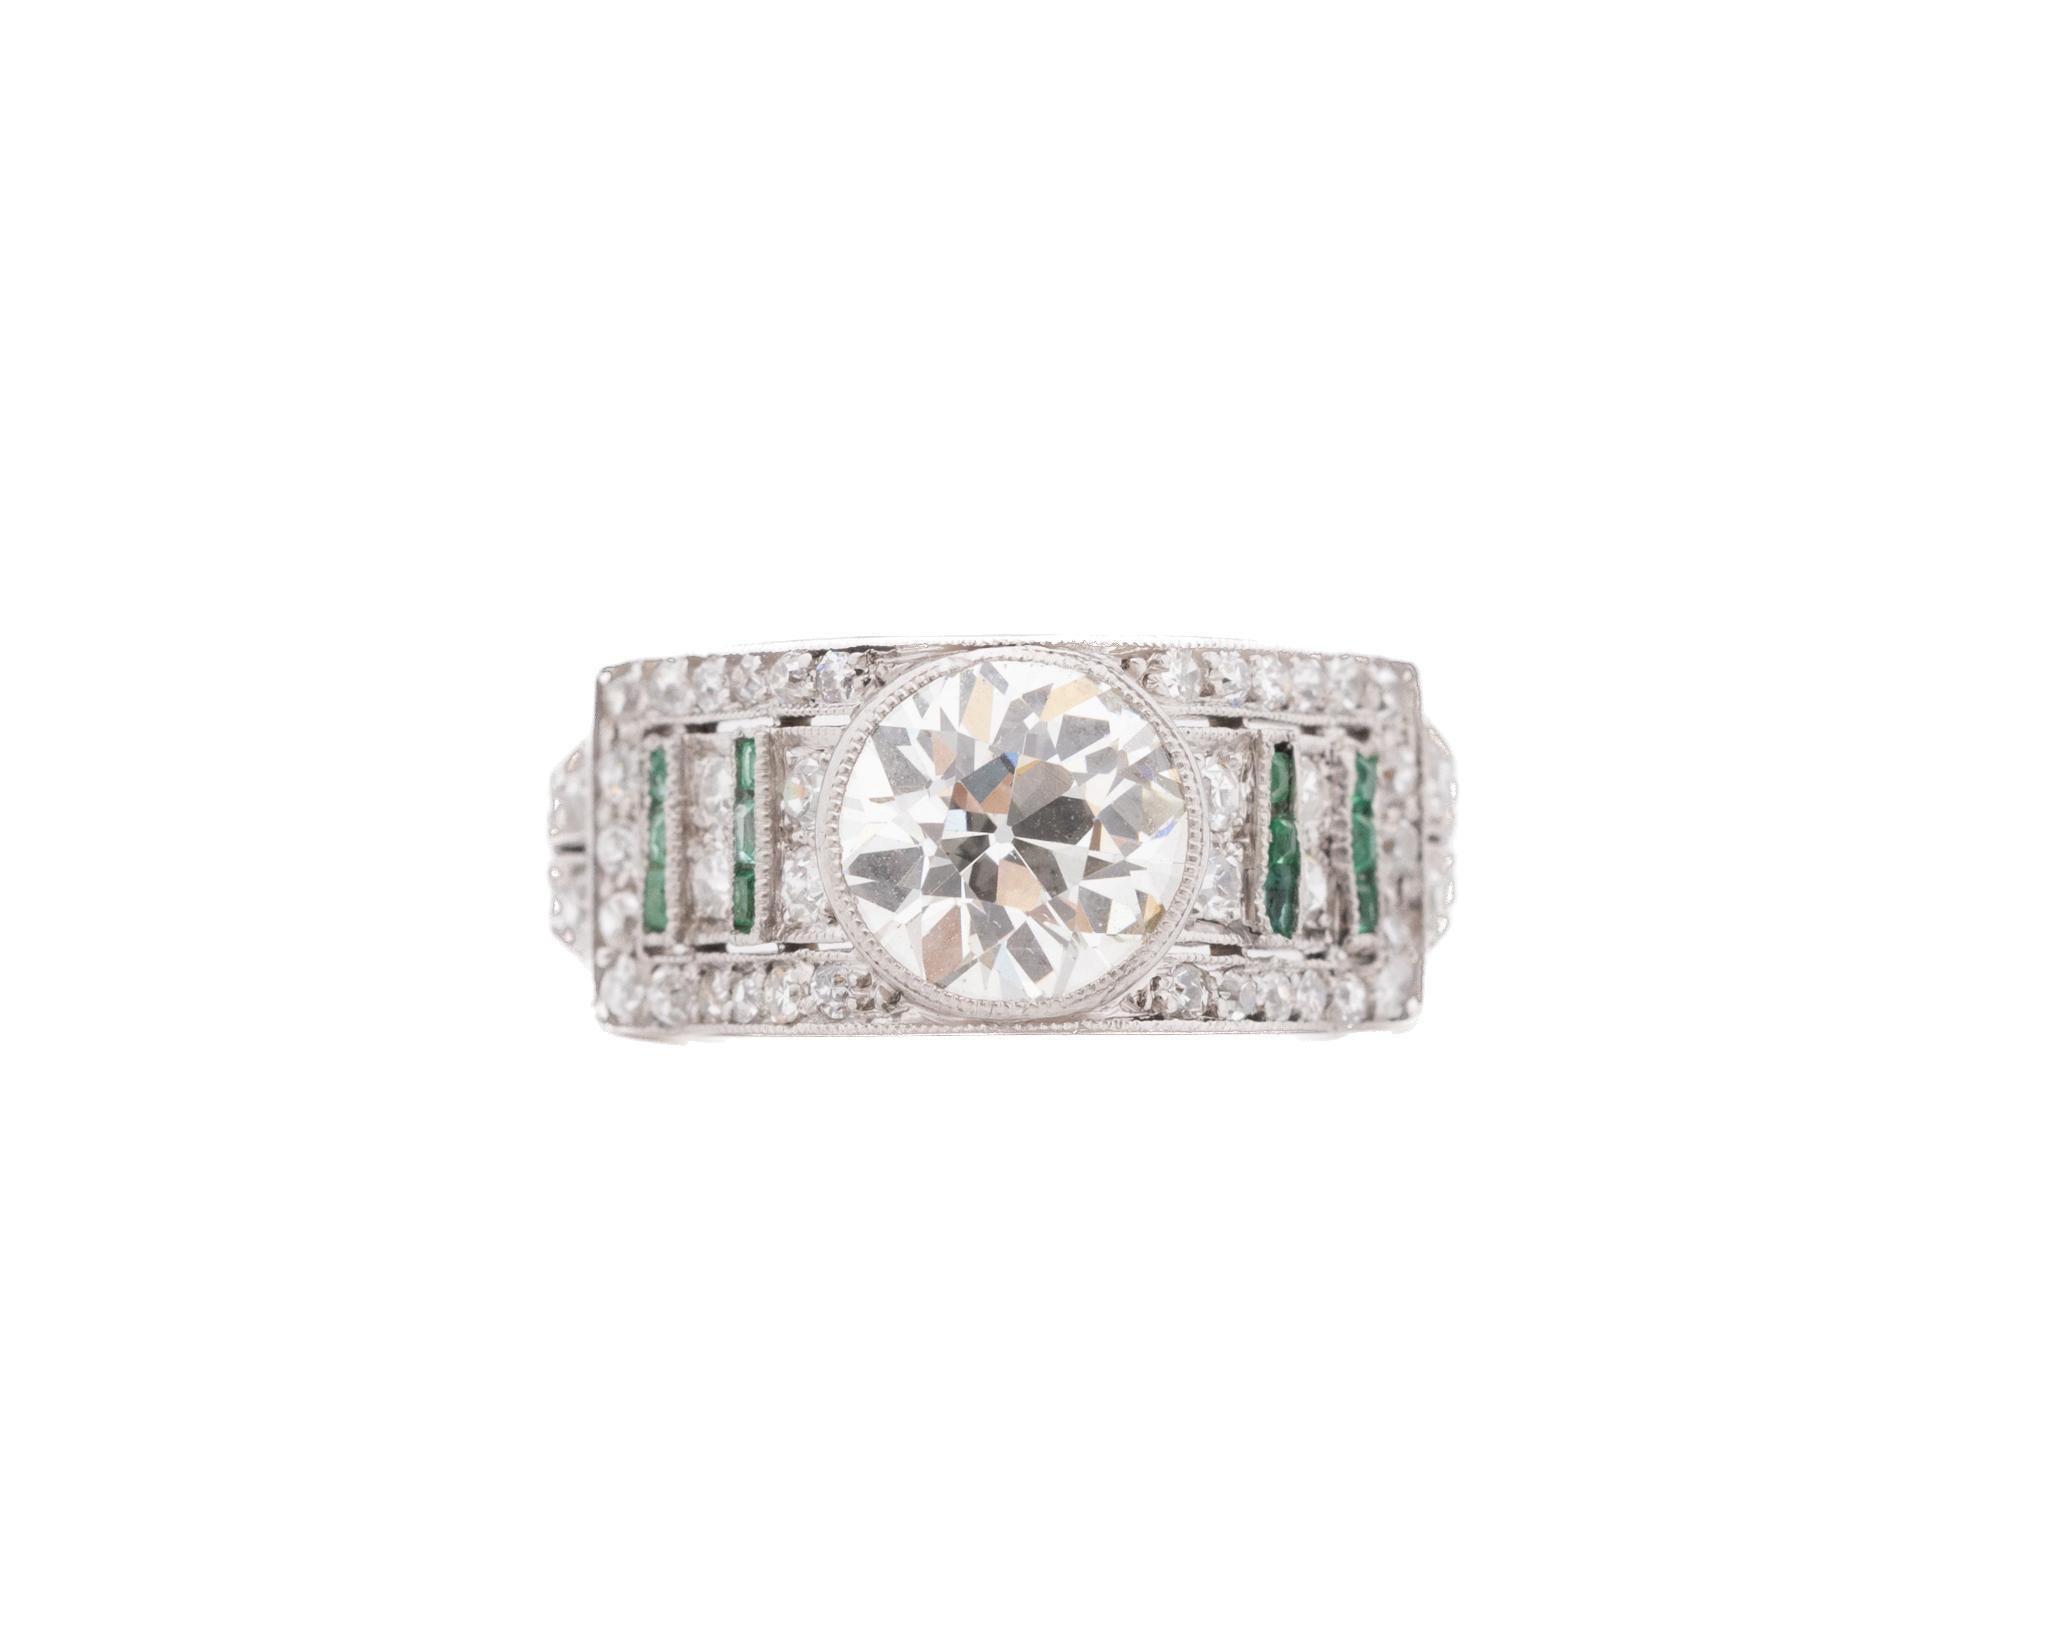 Circa 1920s Art Deco Emerald and Old European Diamond Engagement Ring For Sale 3